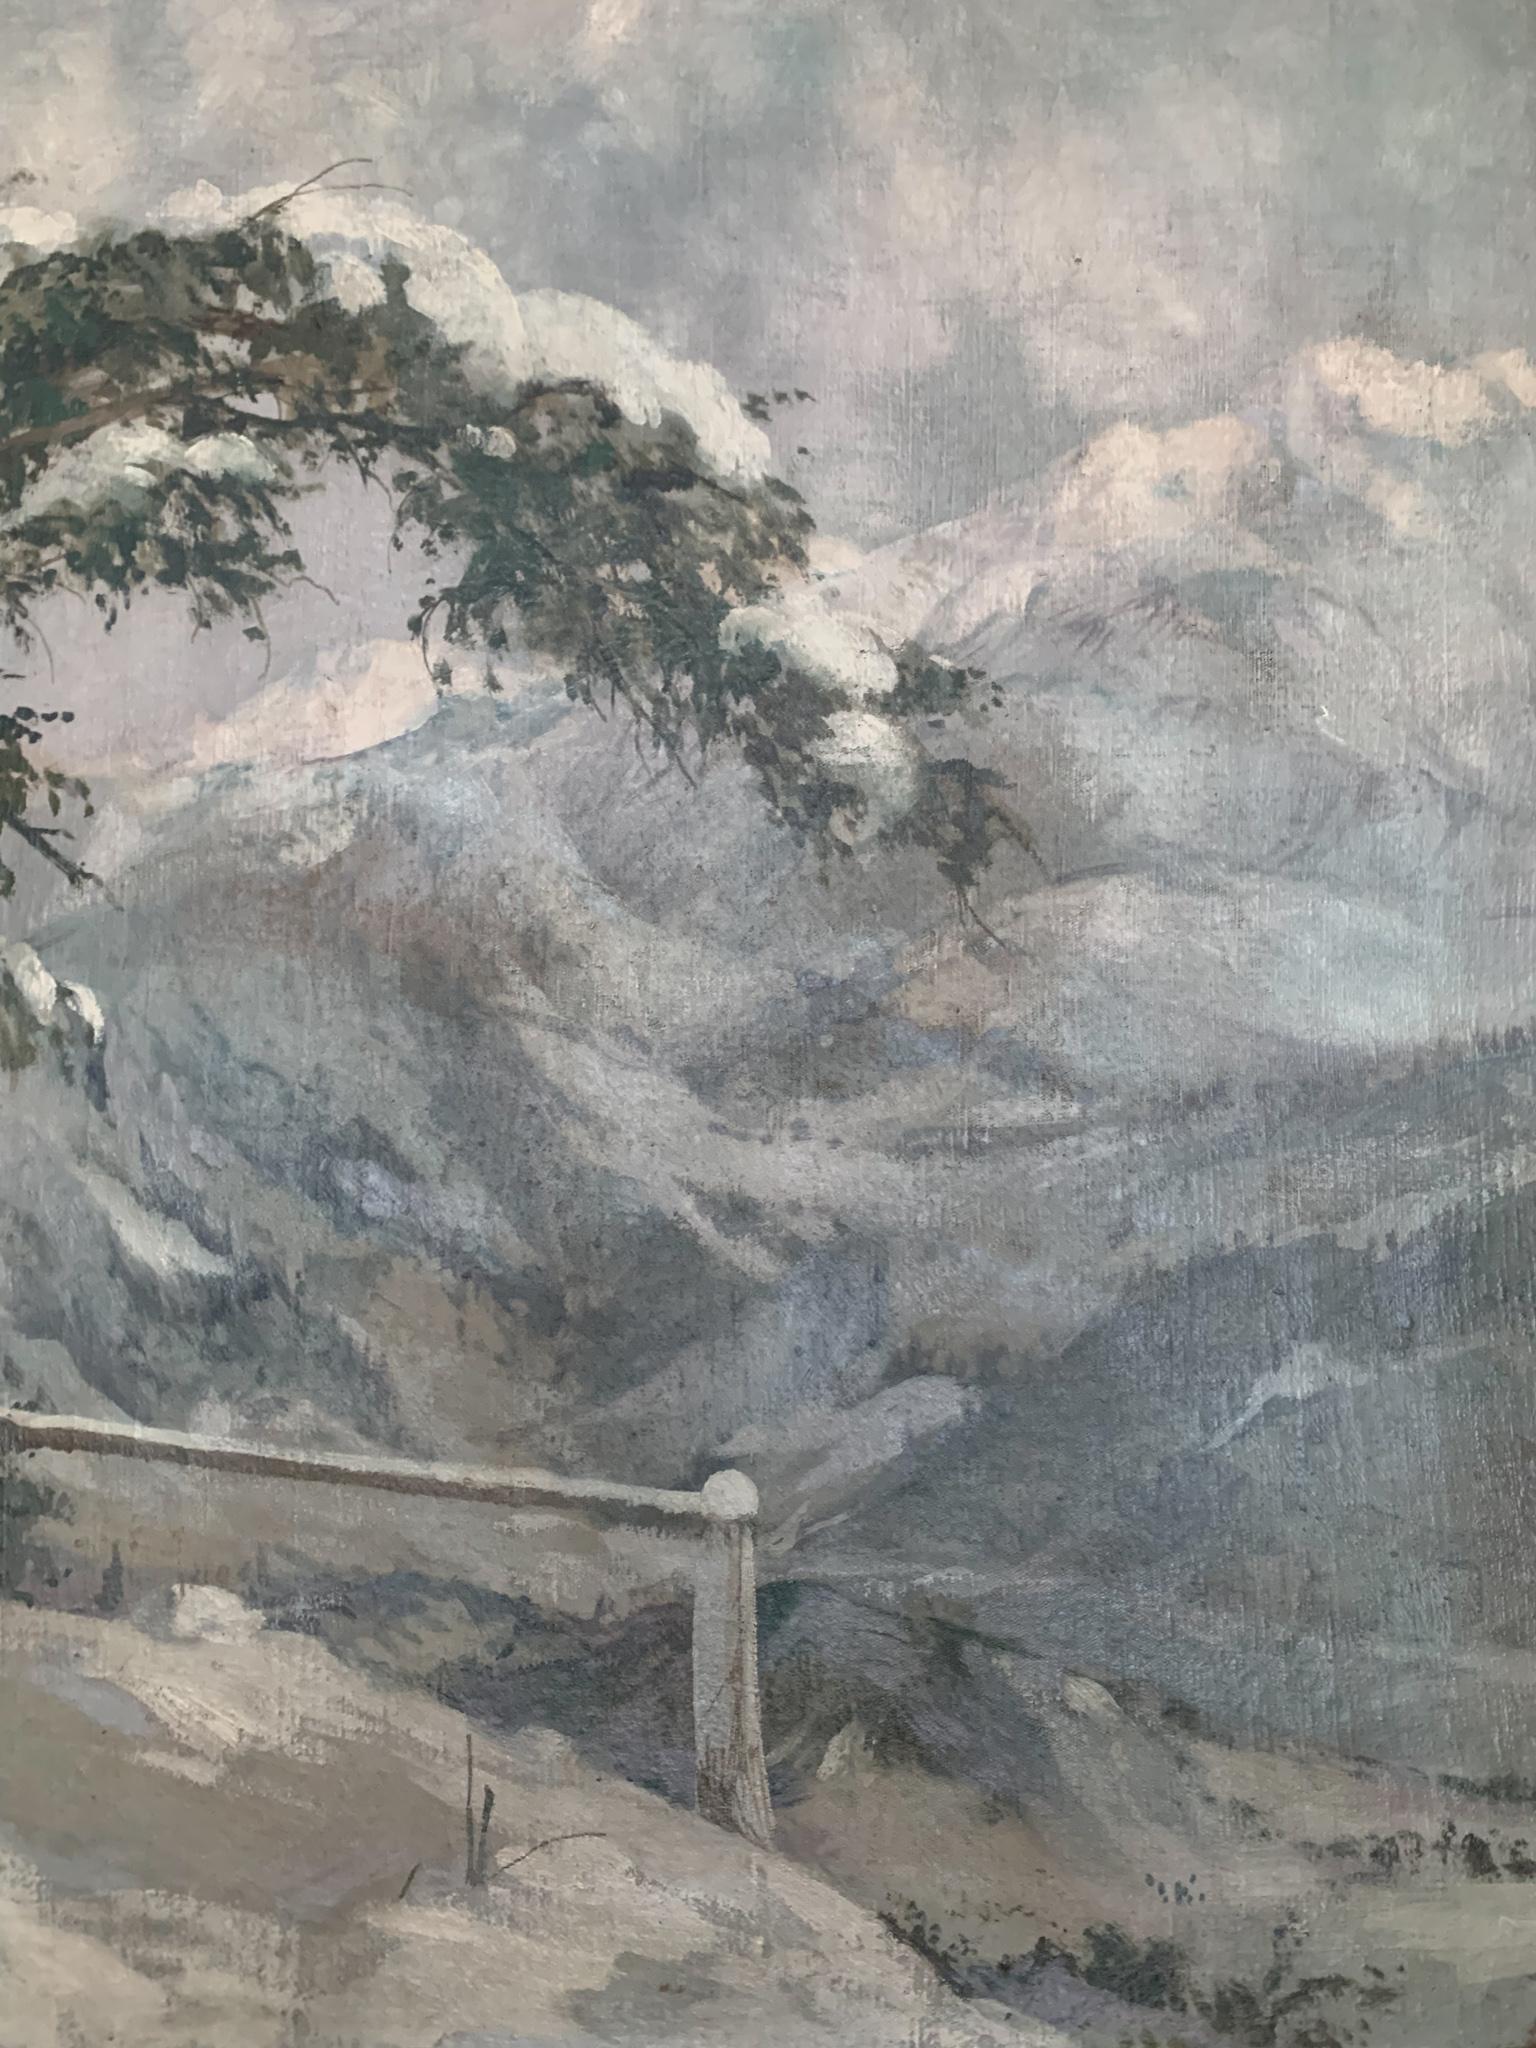 Italian Oil Painting on Canvas by Alberto Dressler 'Snowy Landscape' from 1944 For Sale 5